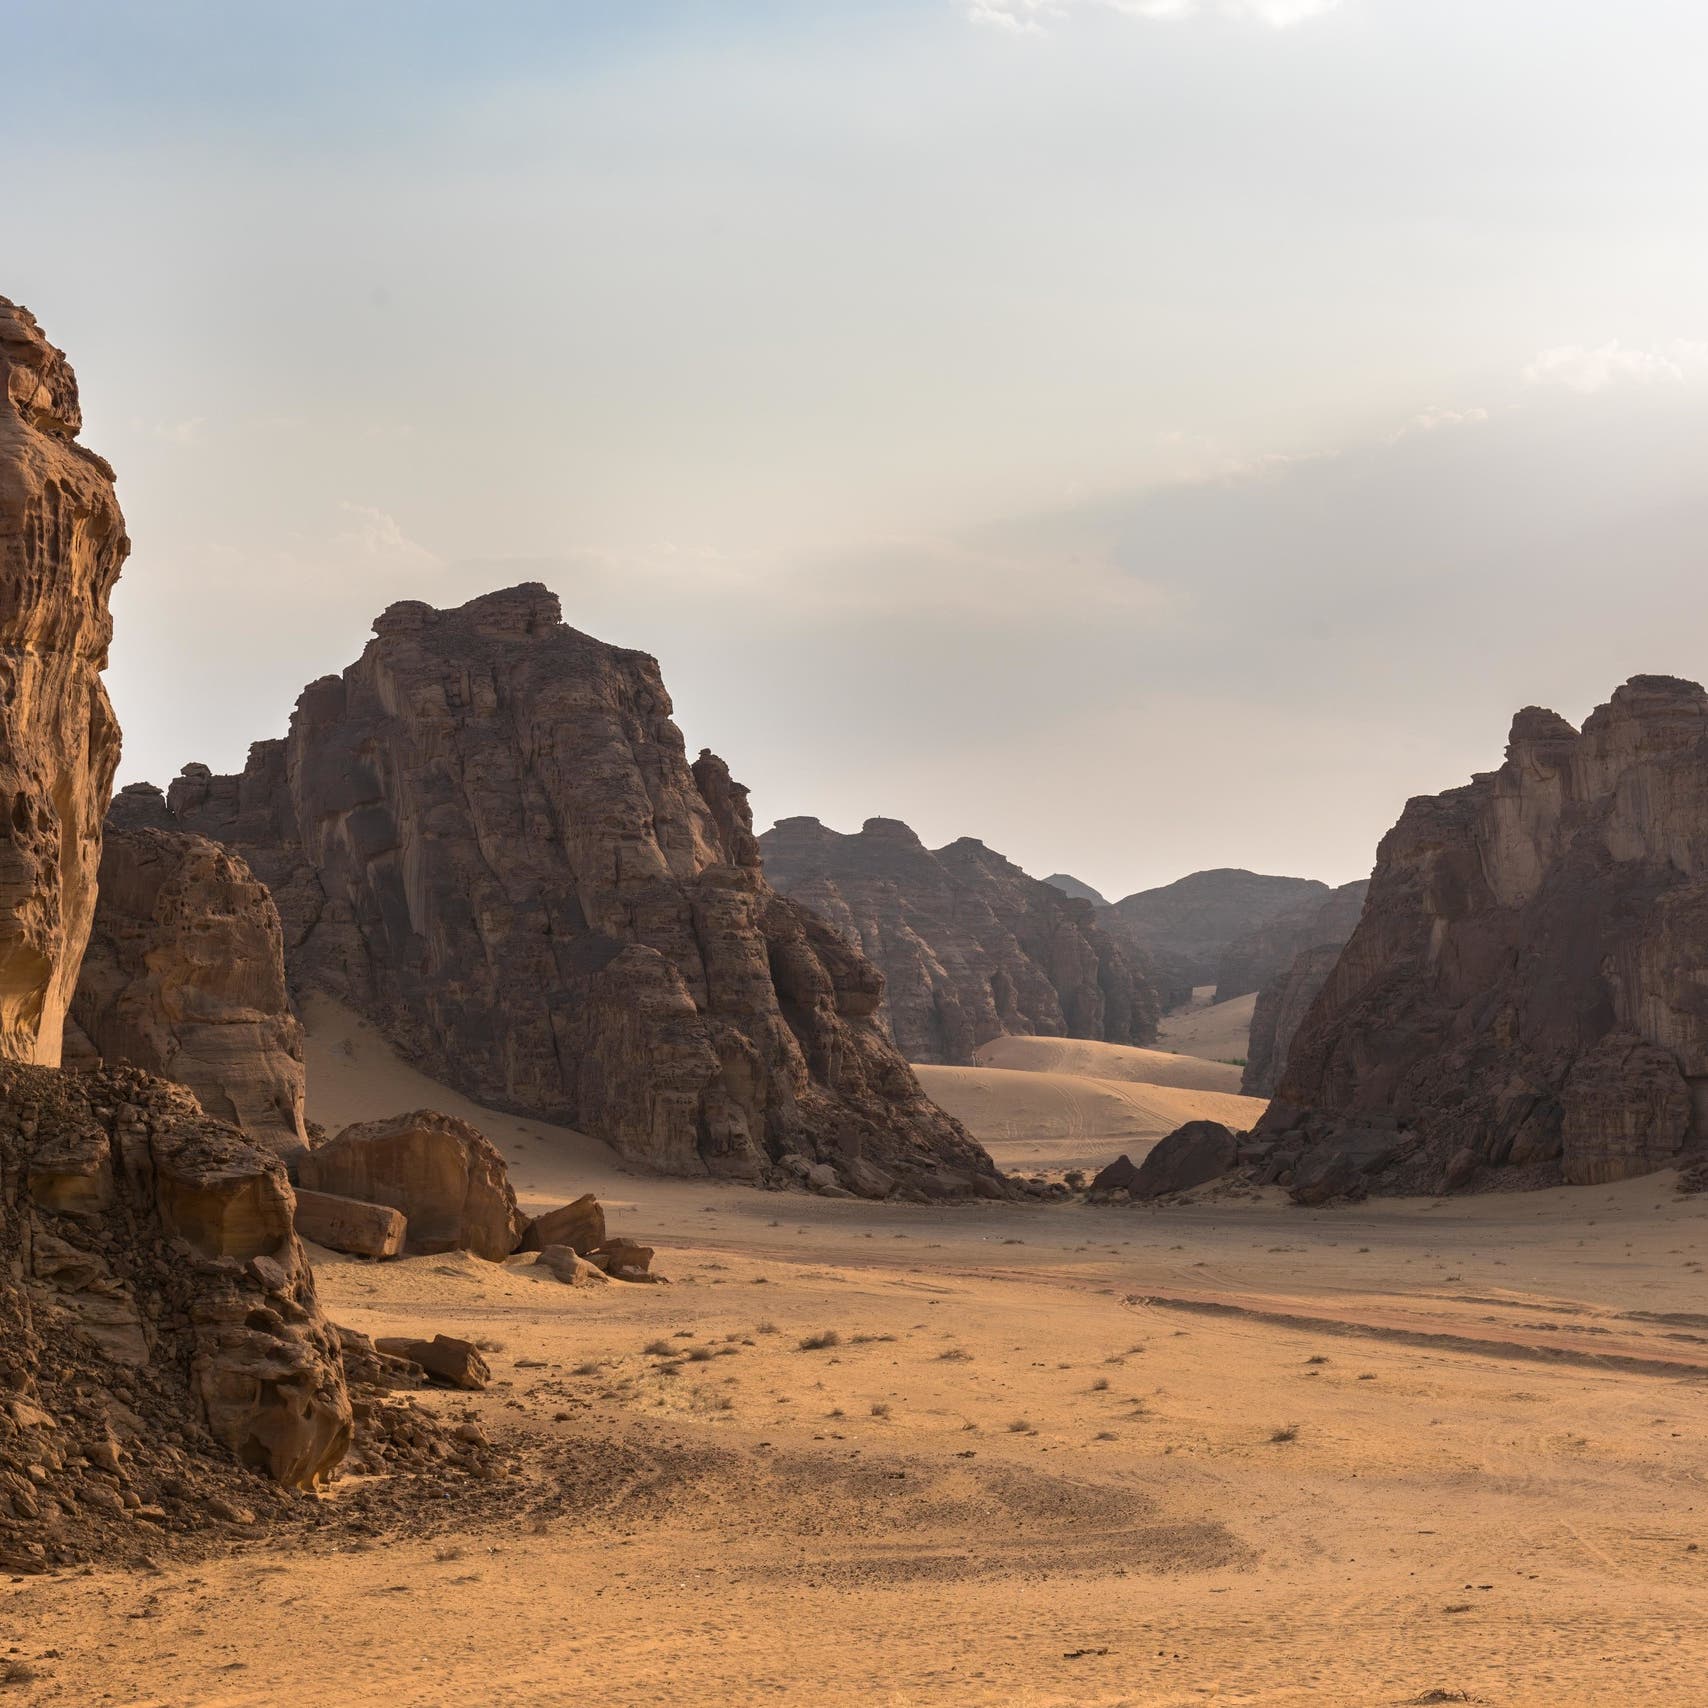 Traveling to Saudi Arabia: Your guide to visiting the stunning ancient city of AlUla